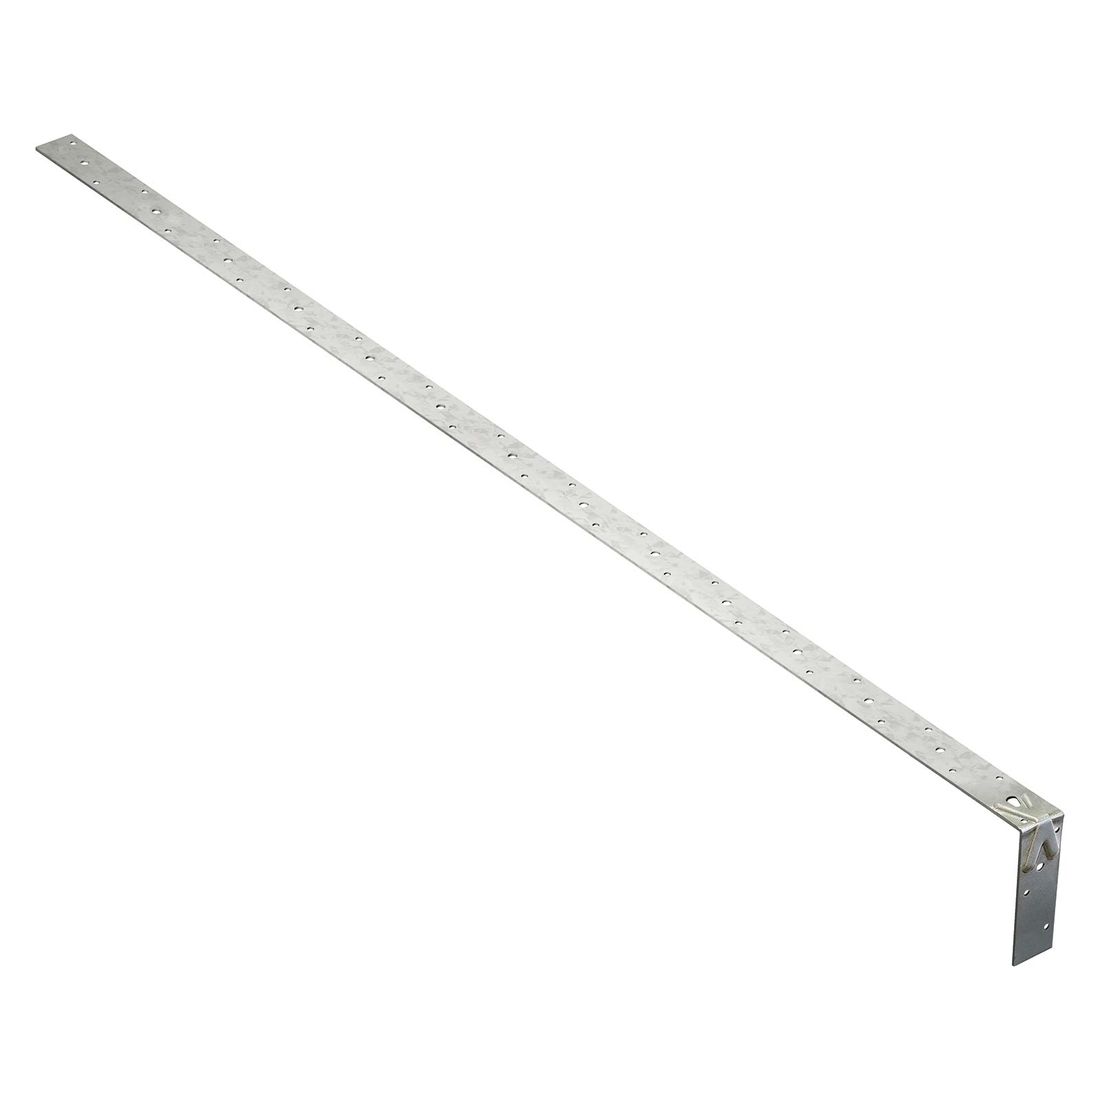 Engineered Strap Heavy Duty 1500Mm Overall Bent 100Mm